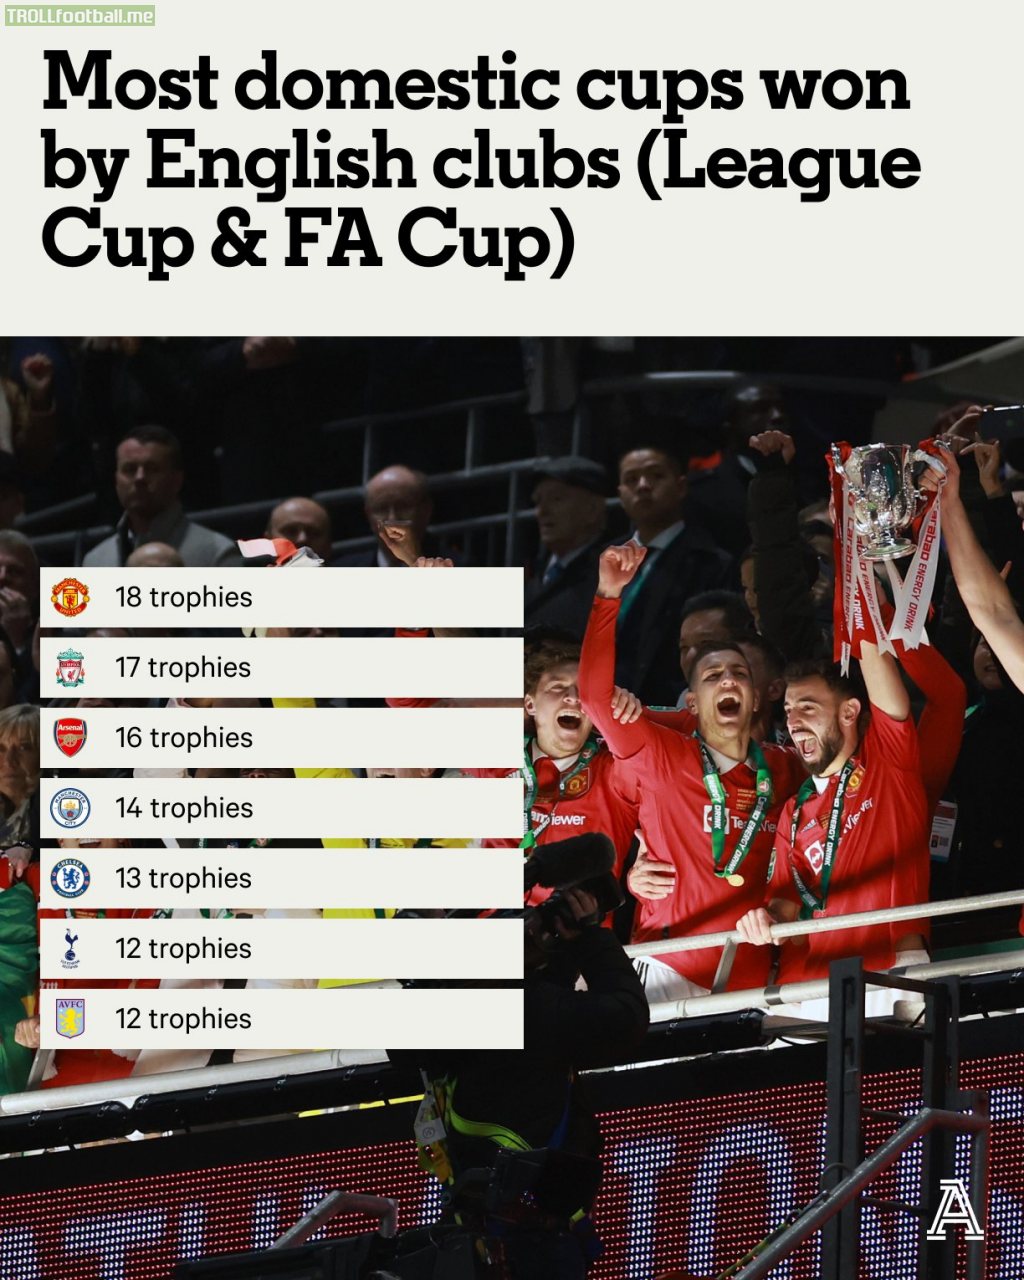 Manchester United have won the most domestic cups in English Football [League Cup & FA Cup]